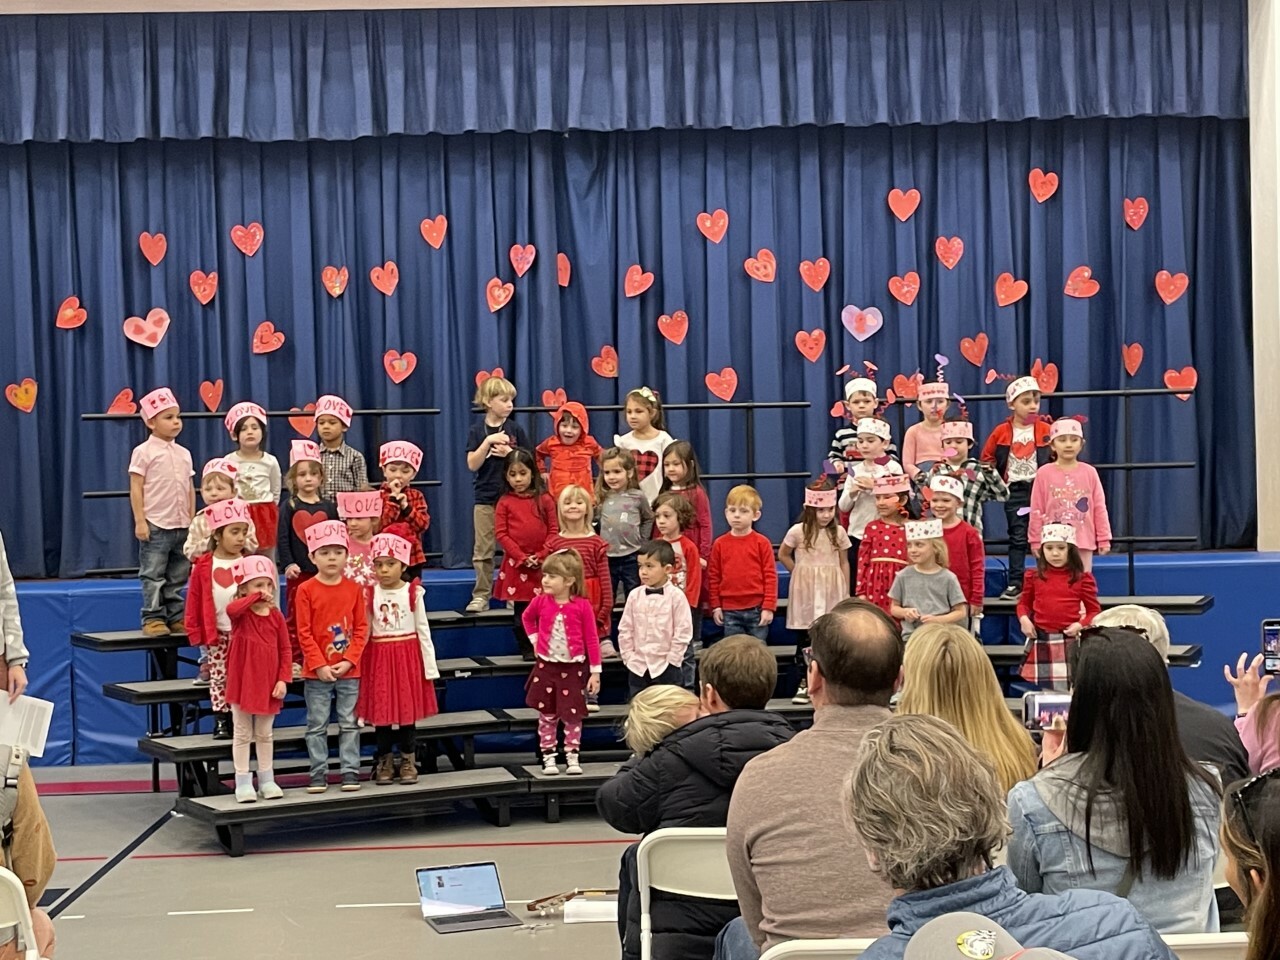 Sag Harbor Elementary’s pre-K class hosted a “Share the Love Sing-Along” on Valentine’s Day. The students prepared for the singalong in their music classes with the elementary school’s music and instrument teacher Deanna Locascio. Families were invited to the event to join the students in singing Valentine’s Day songs in both English and Spanish. COURTESY SAG HARBOR SCHOOL DISTRICT